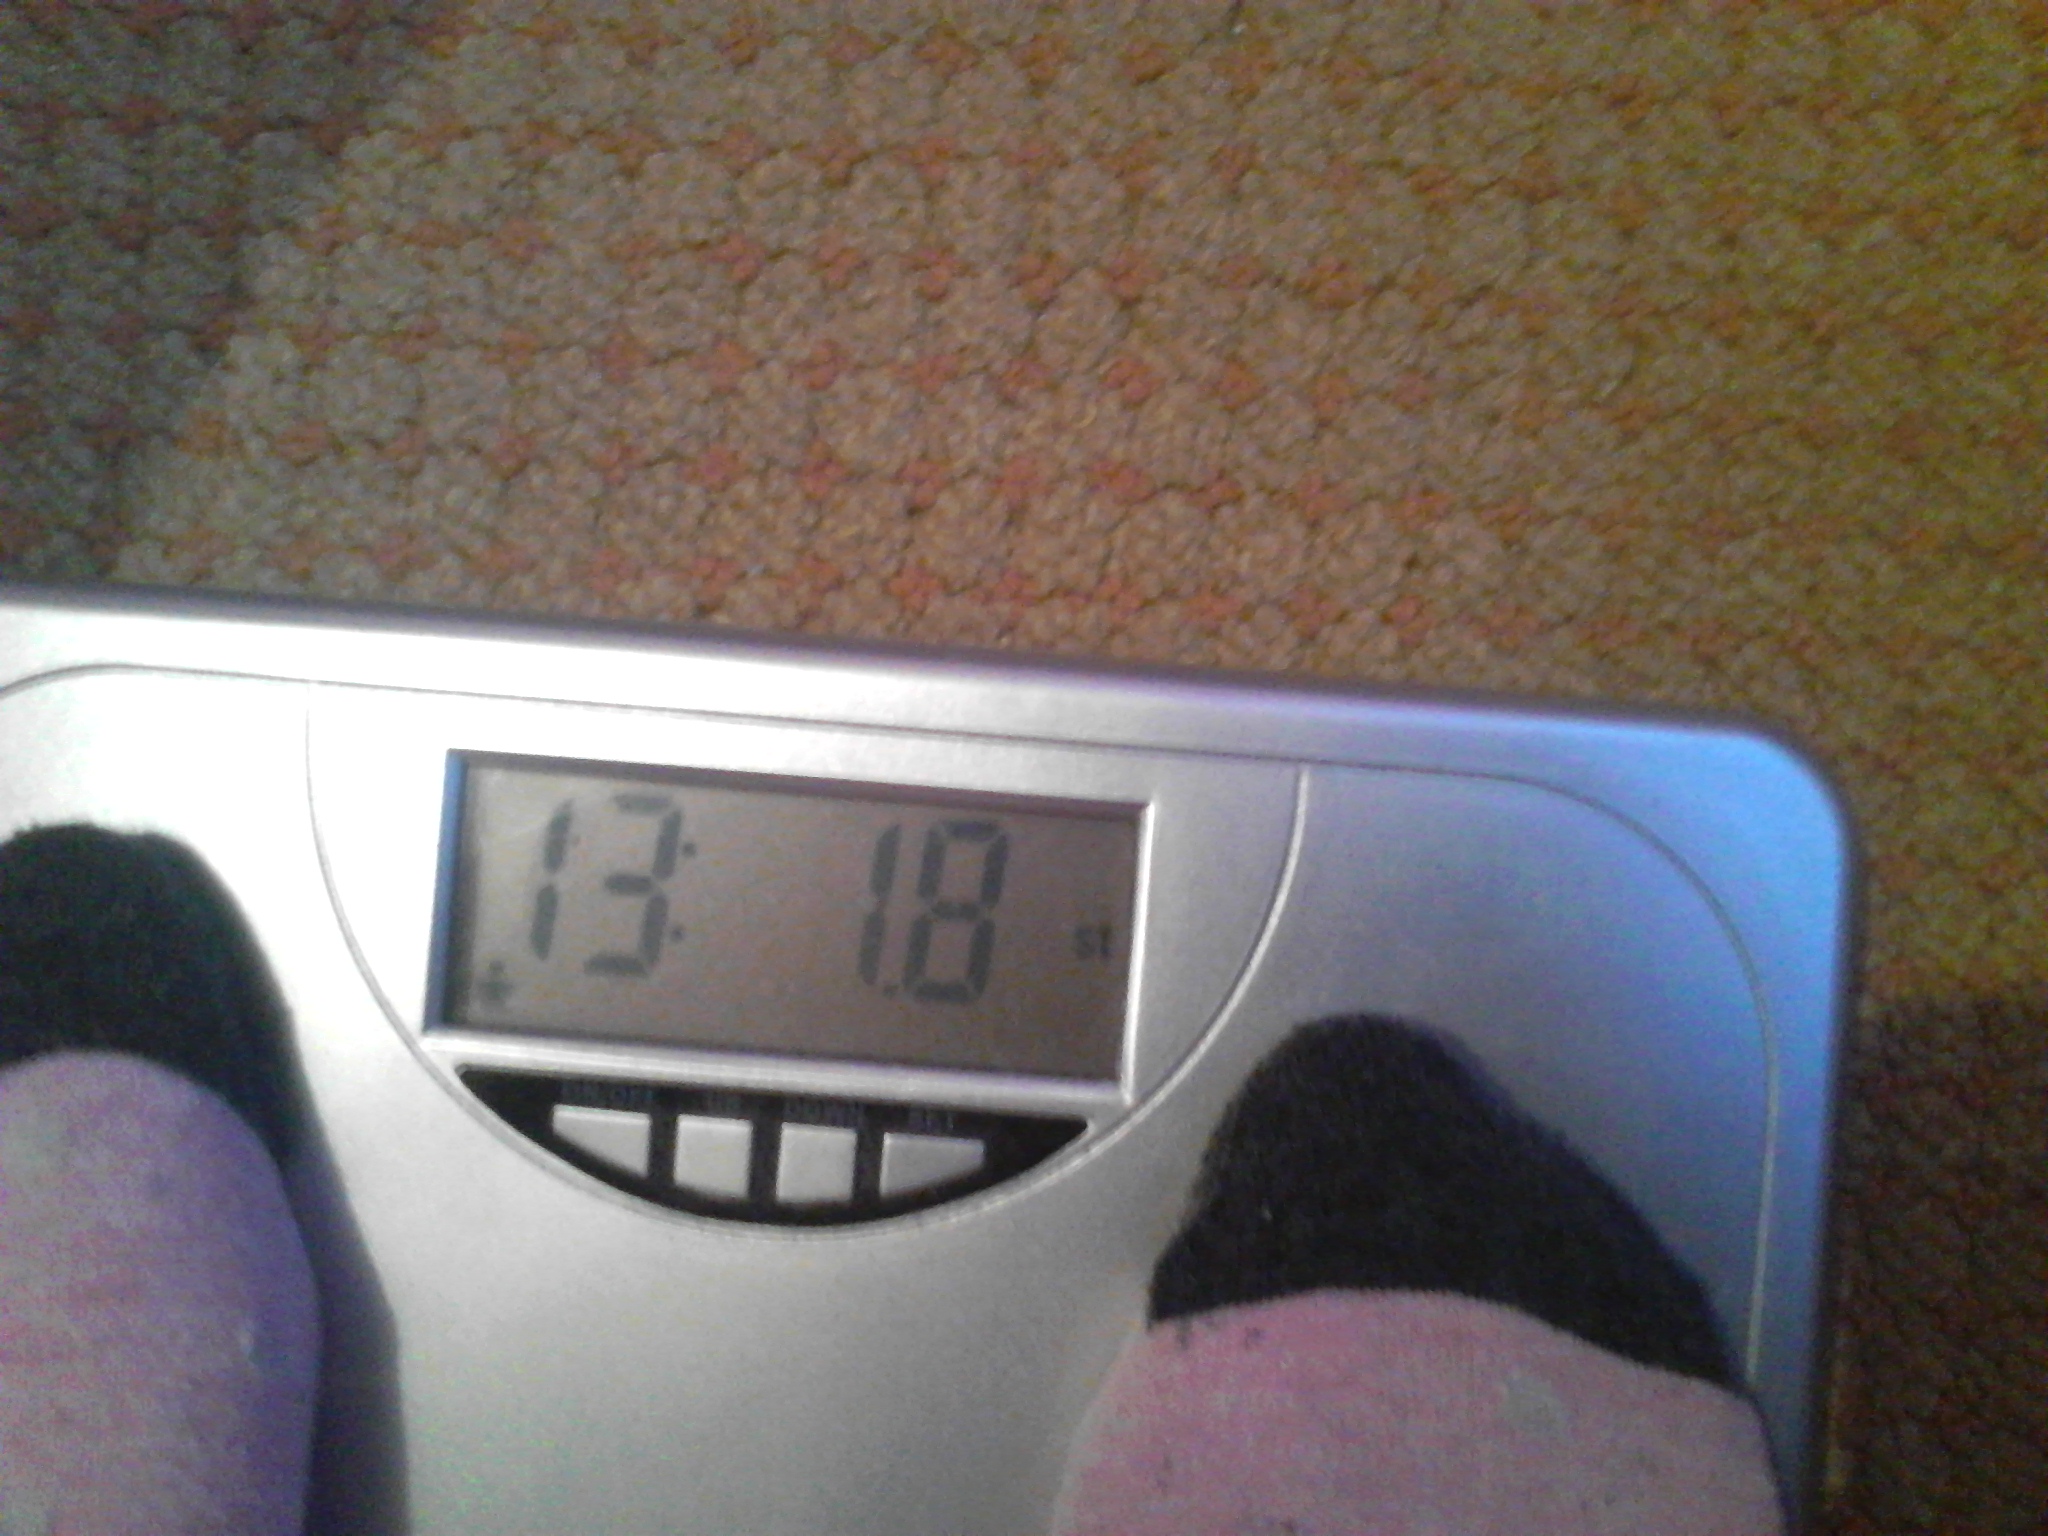 First Weigh In - 9 lbs down!